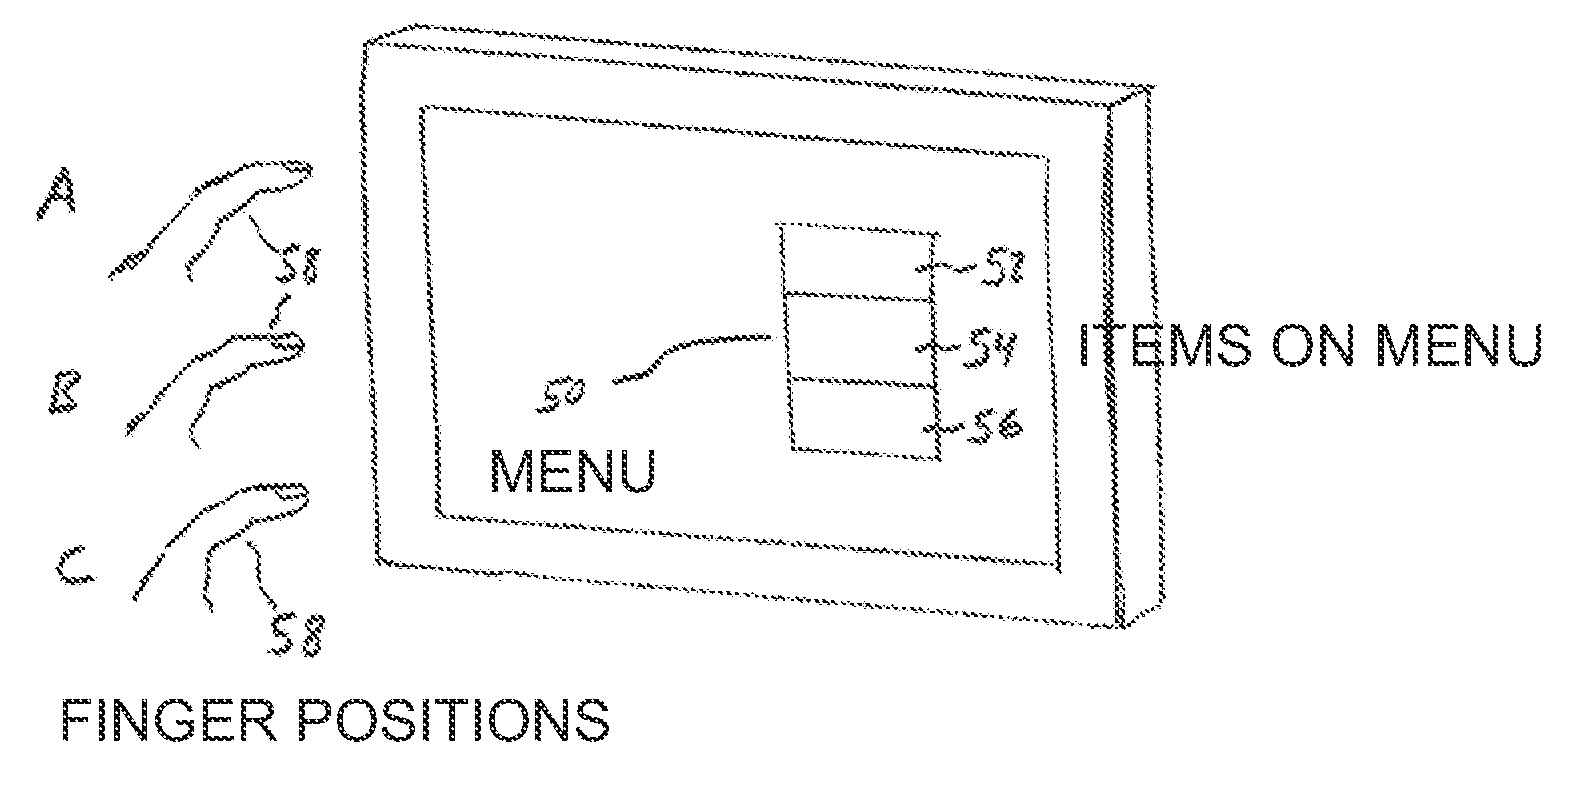 Touchpad combined with a display and having proximity and touch sensing capabilities to enable different functions or interfaces to be displayed